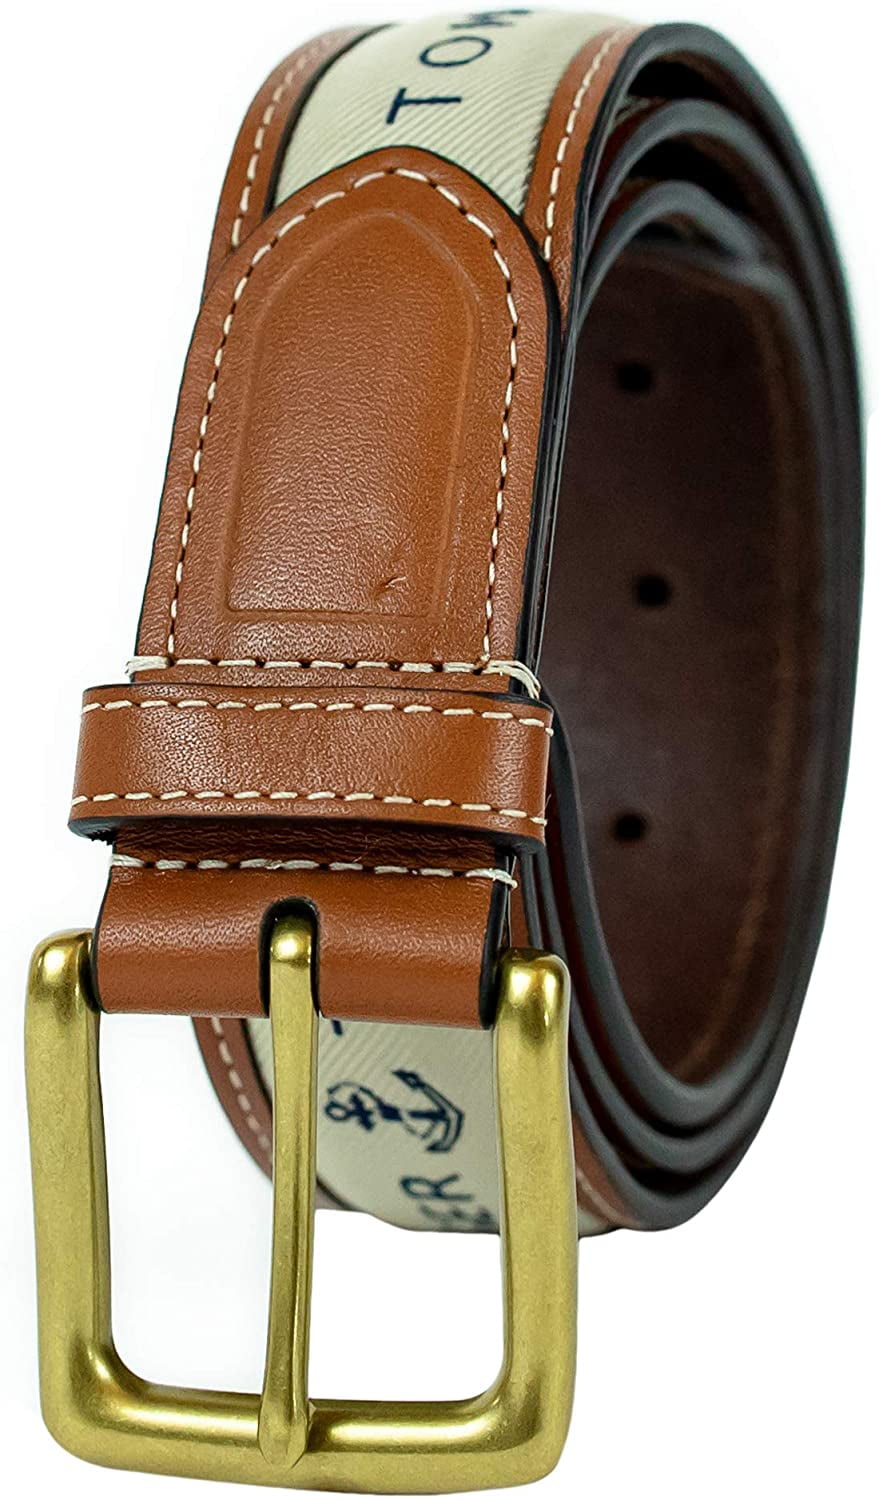 Hilfiger 42 Leather with Fabric Inlay Casual Belt, - Walmart.com